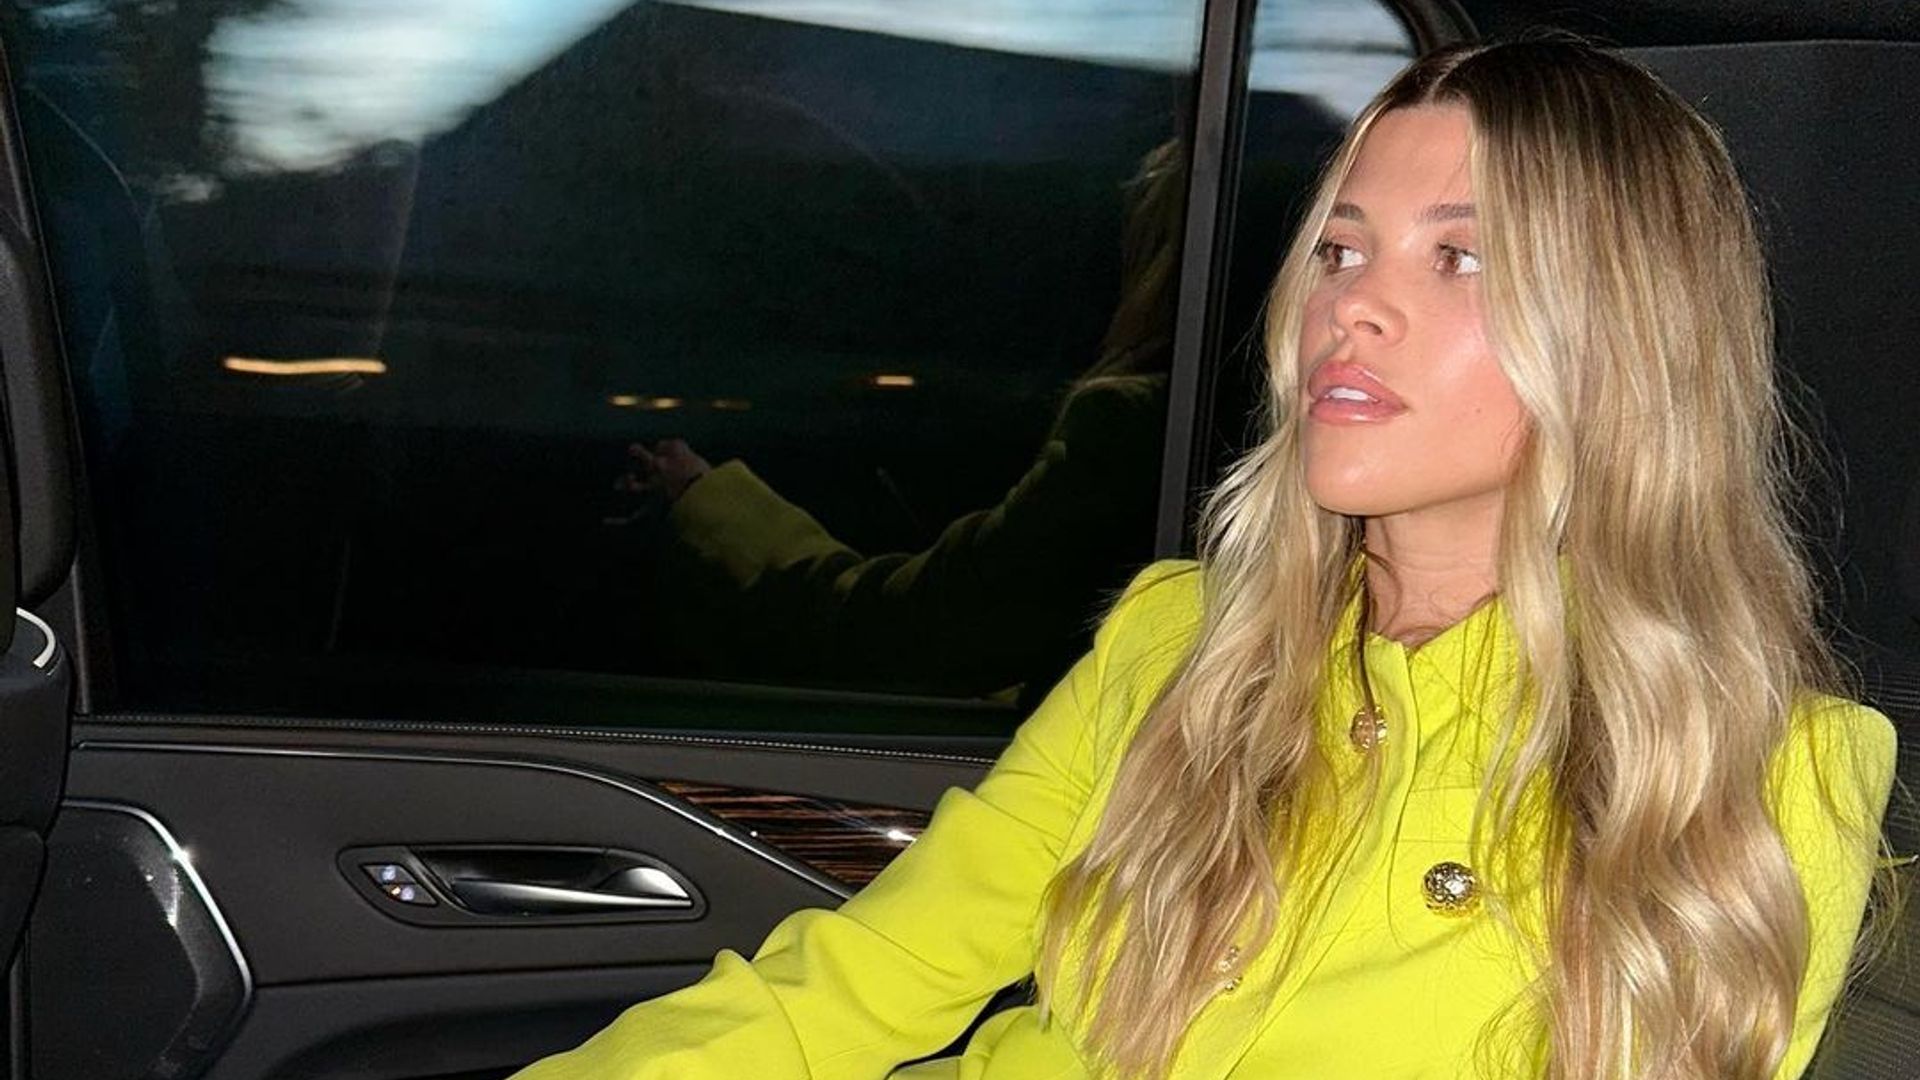 Sofia Richie wears a yellow blazer in the back of a car